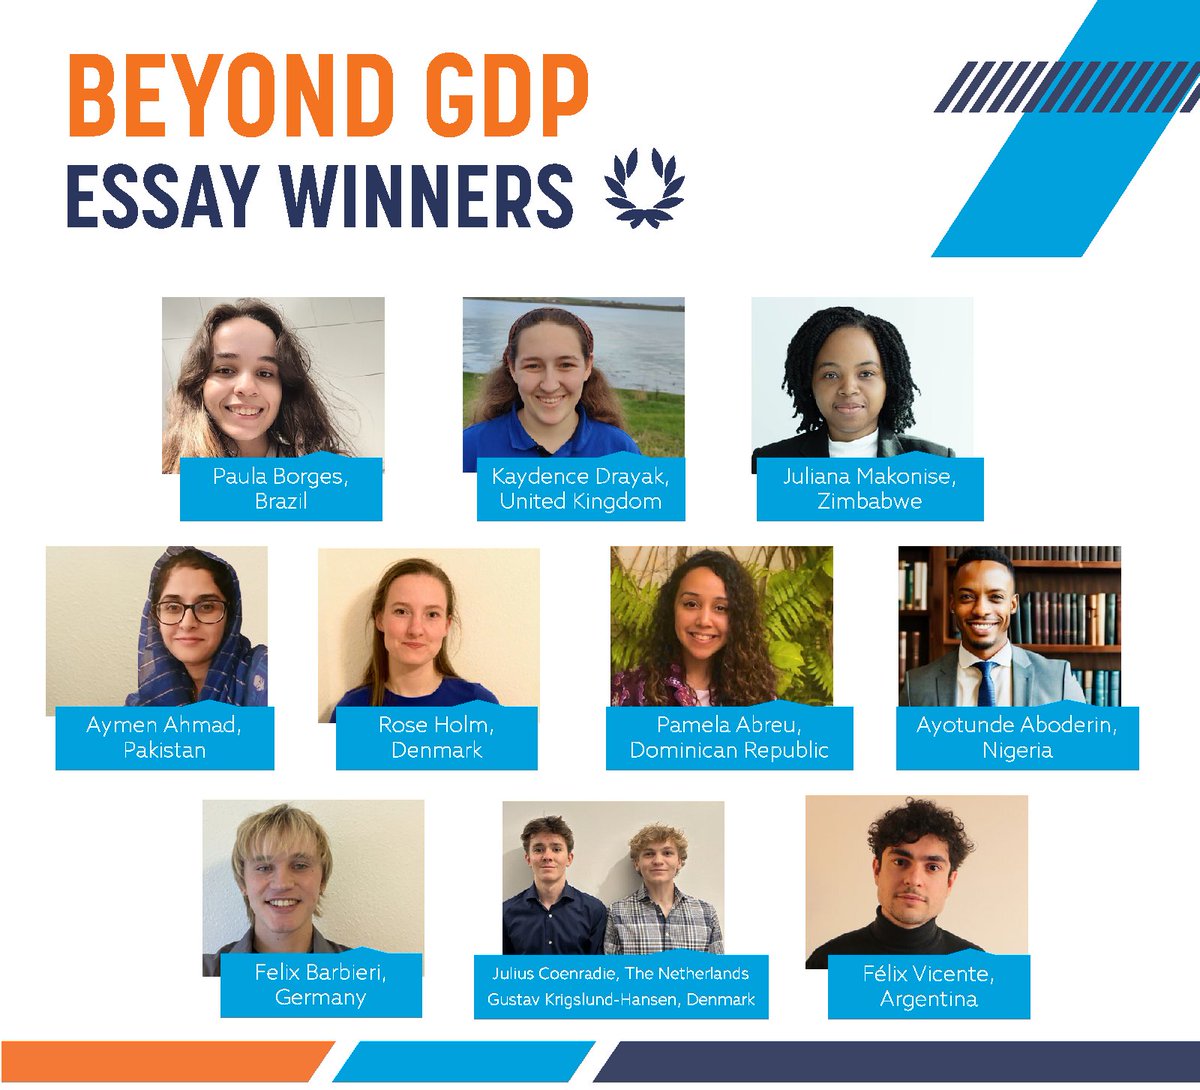 [2/2] Today we’re happy to share the 10 best essays featuring insights of young people from 🇦🇷🇧🇷🇩🇴🇩🇰🇩🇪🇳🇱🇳🇬🇵🇰🇬🇧🇿🇼. While we weren’t able to include all essays, the overall response was overwhelming. Check out the publication: 🔗tinyurl.com/5hbvyy74 #YouthMovingBeyondGDP